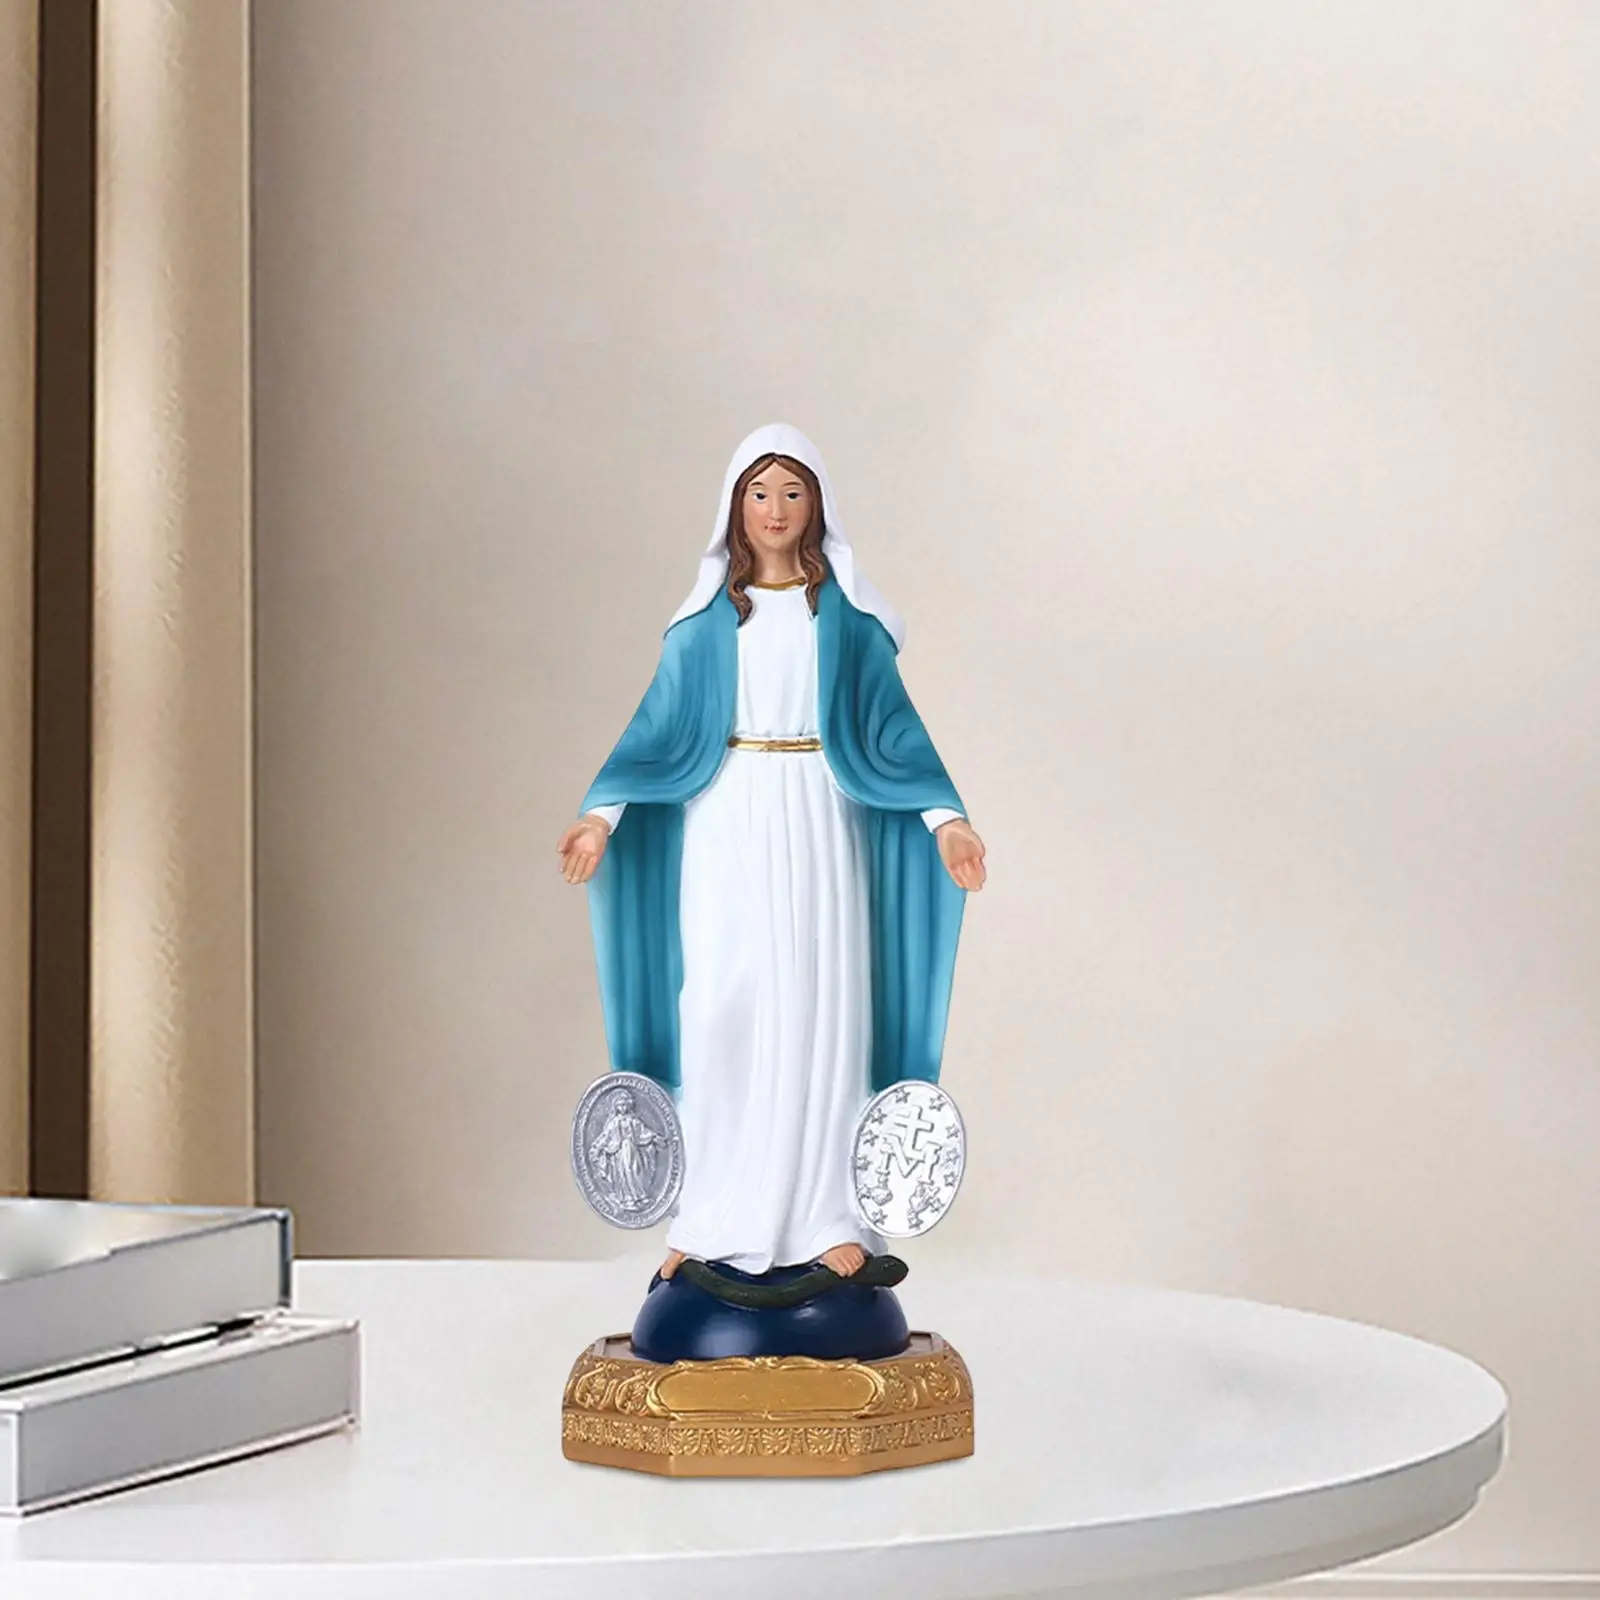 Virgin Mary Statue Statuette Catholic Virgin Mother Mary Statue Standing Statue for Table Bookshelf Home Bedroom Religious